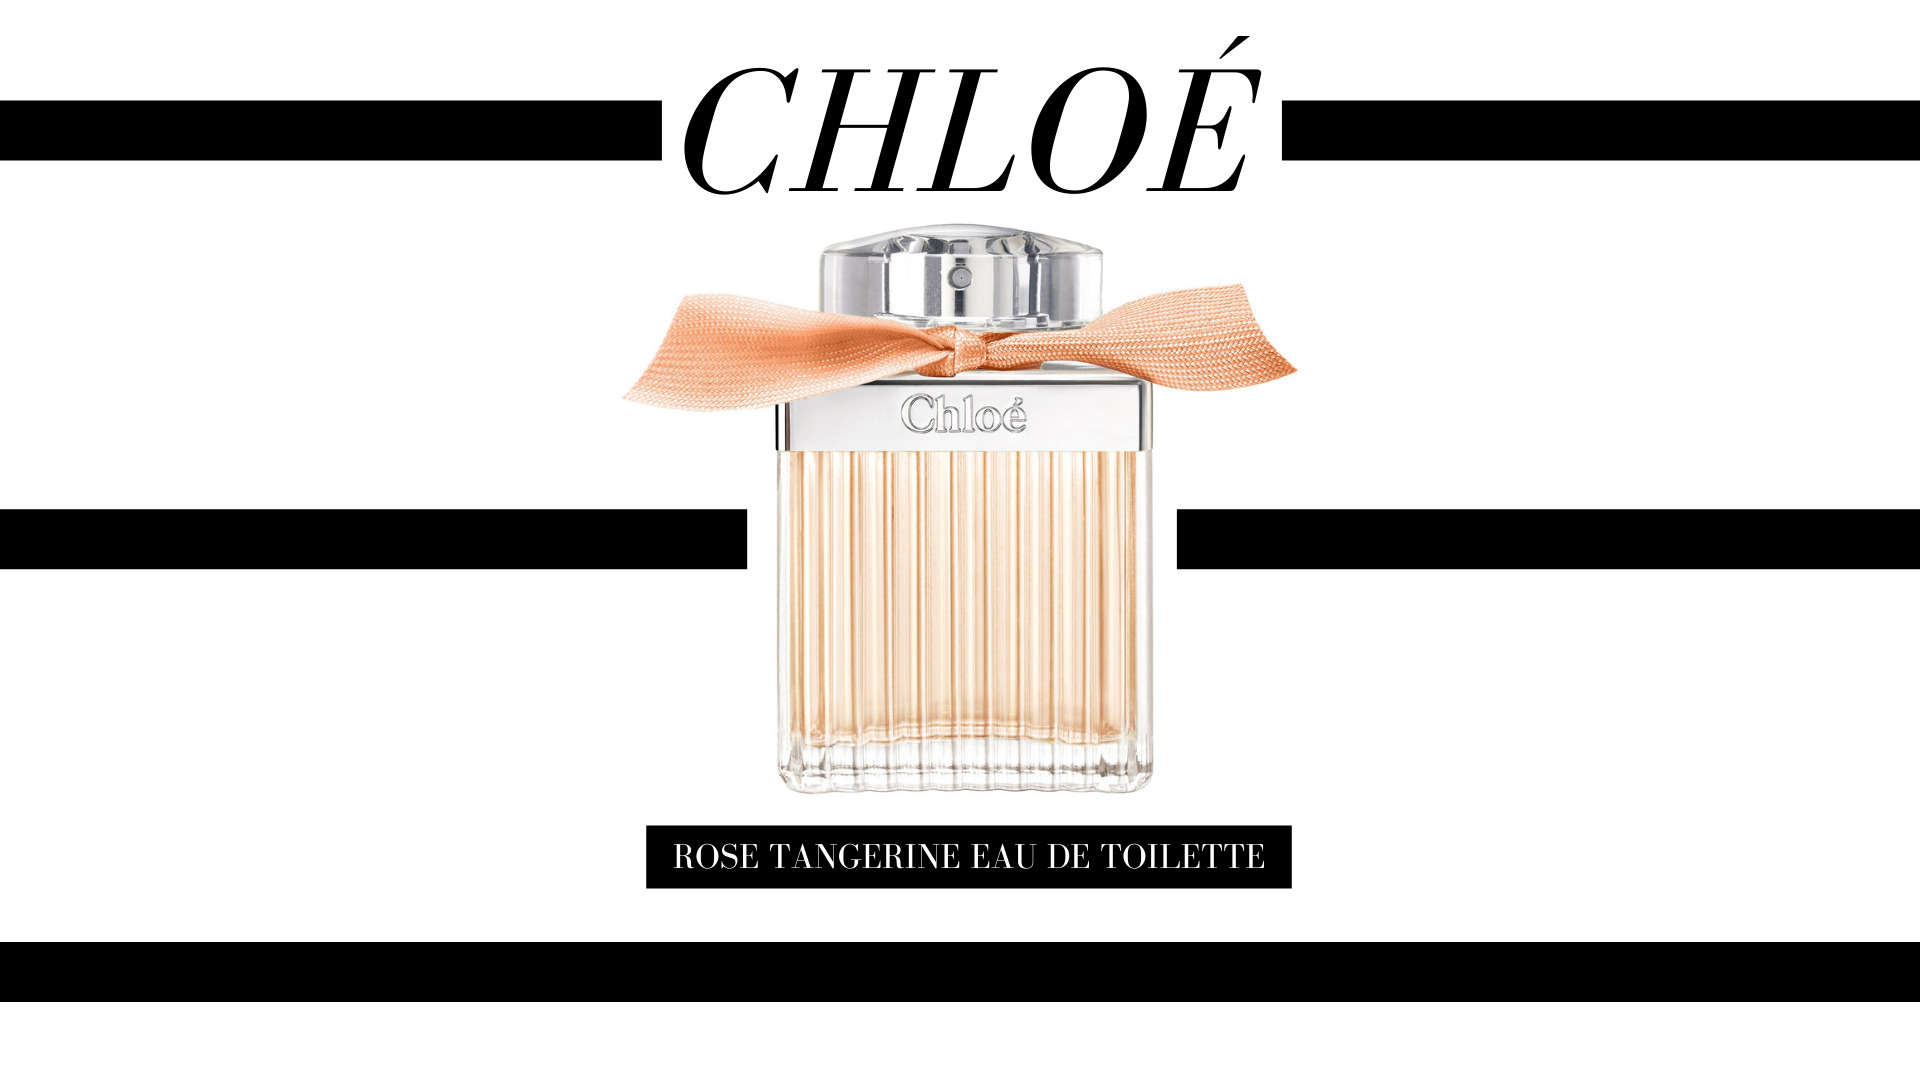 Chloé Rose Tangerine Eau de Toilette is such a fresh fruity fragrance! With elements like tangerine essence, rose absolute, and blackcurrant absolute, this perfume is impressive and super-rich!